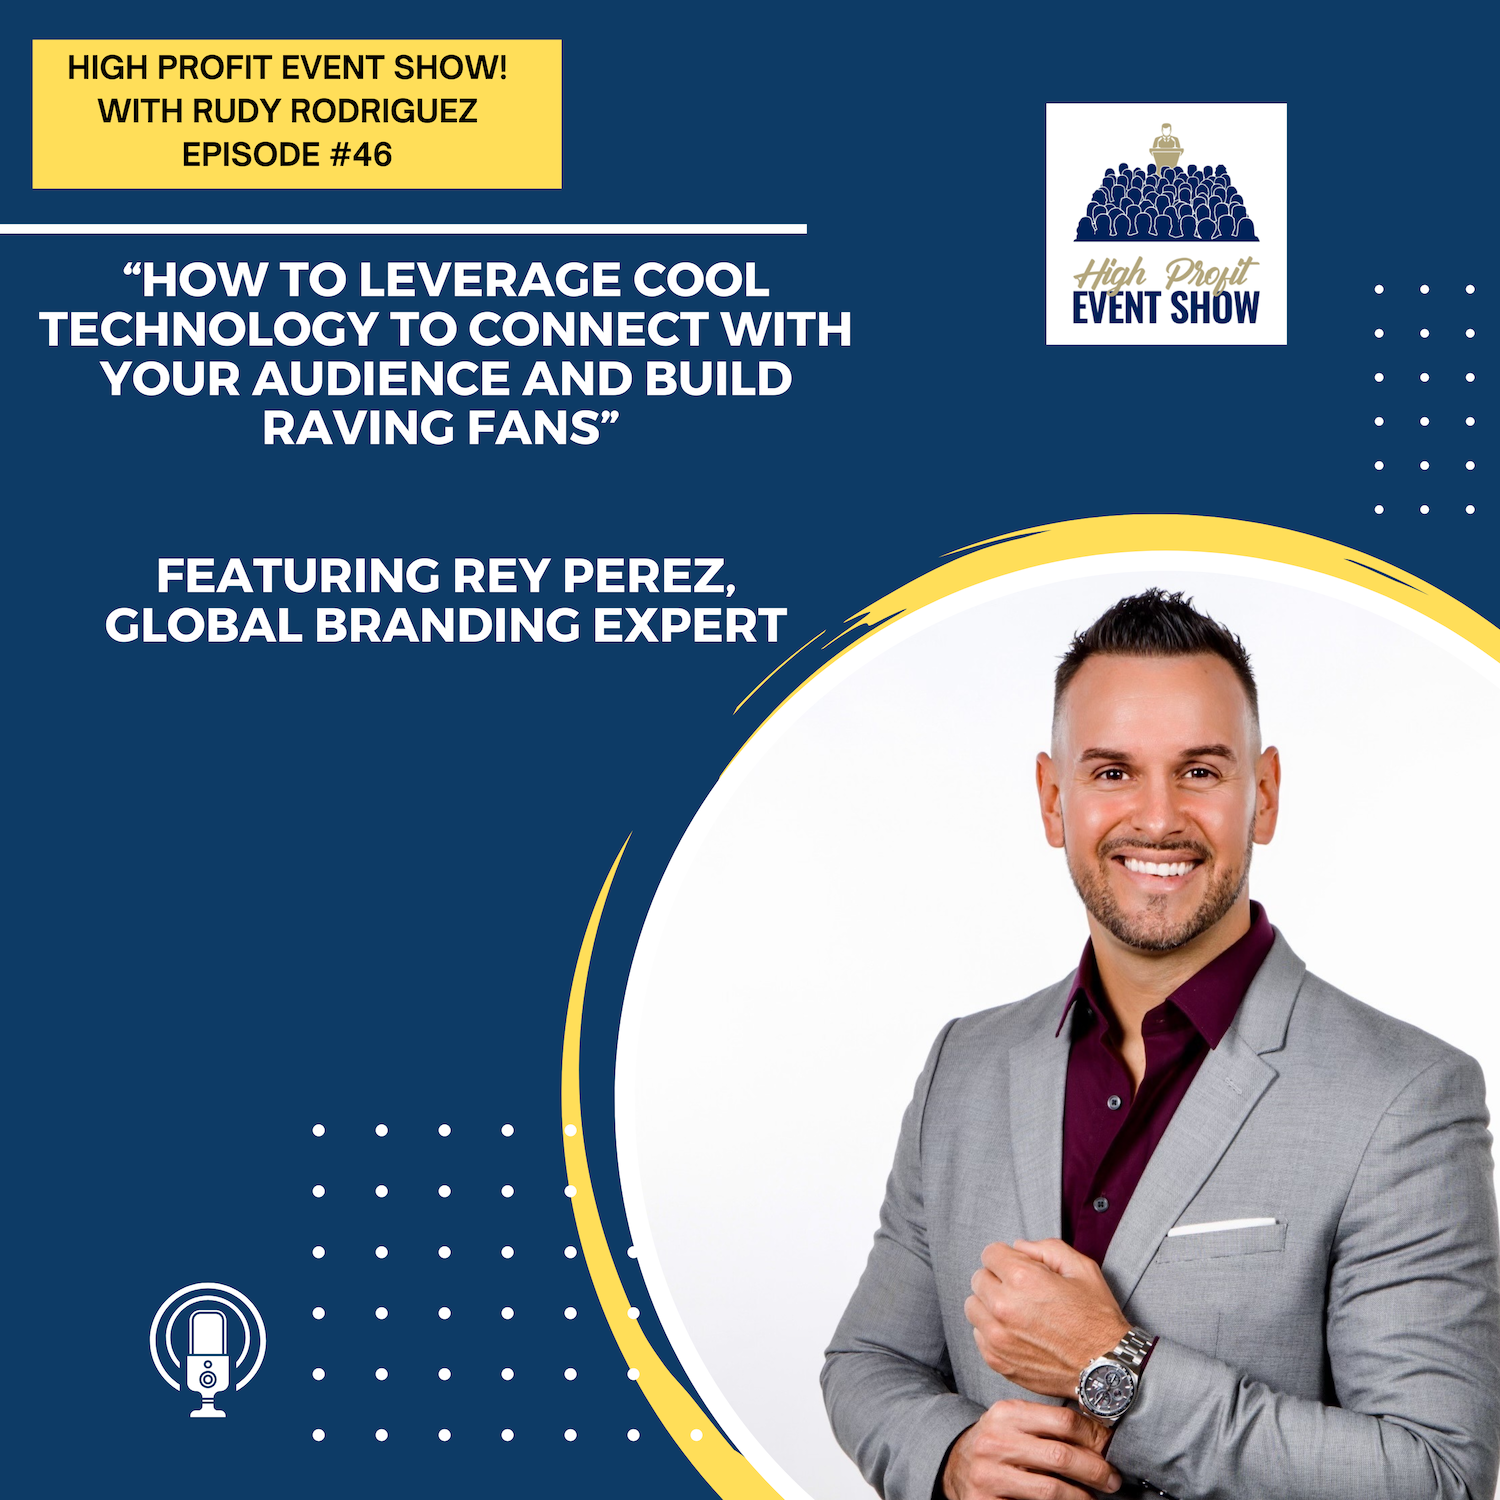 Episode 46: How to Leverage Cool Technology to Connect with Your Audience and Build Raving Fans featuring Rey Perez